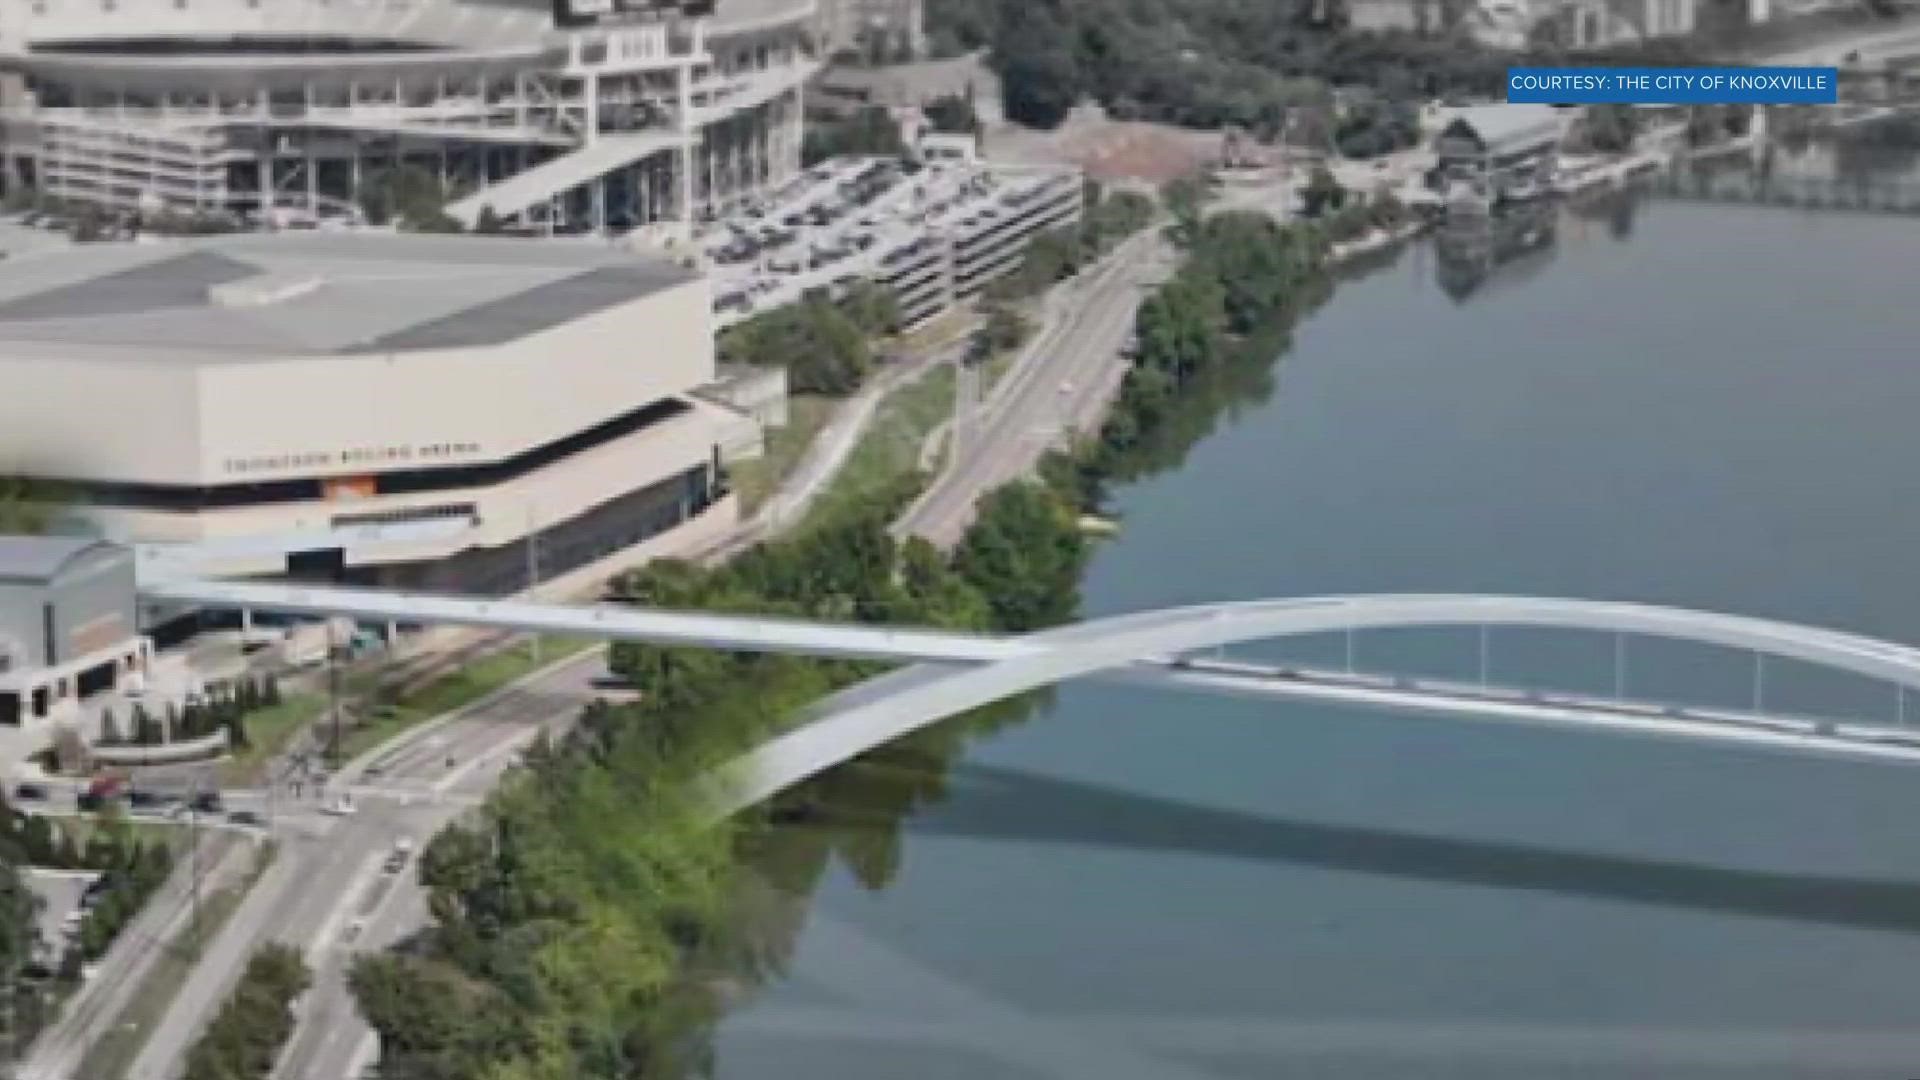 People who live in South Knoxville are concerned about development plans at the waterfront as UT tries to expand its campus across the river.